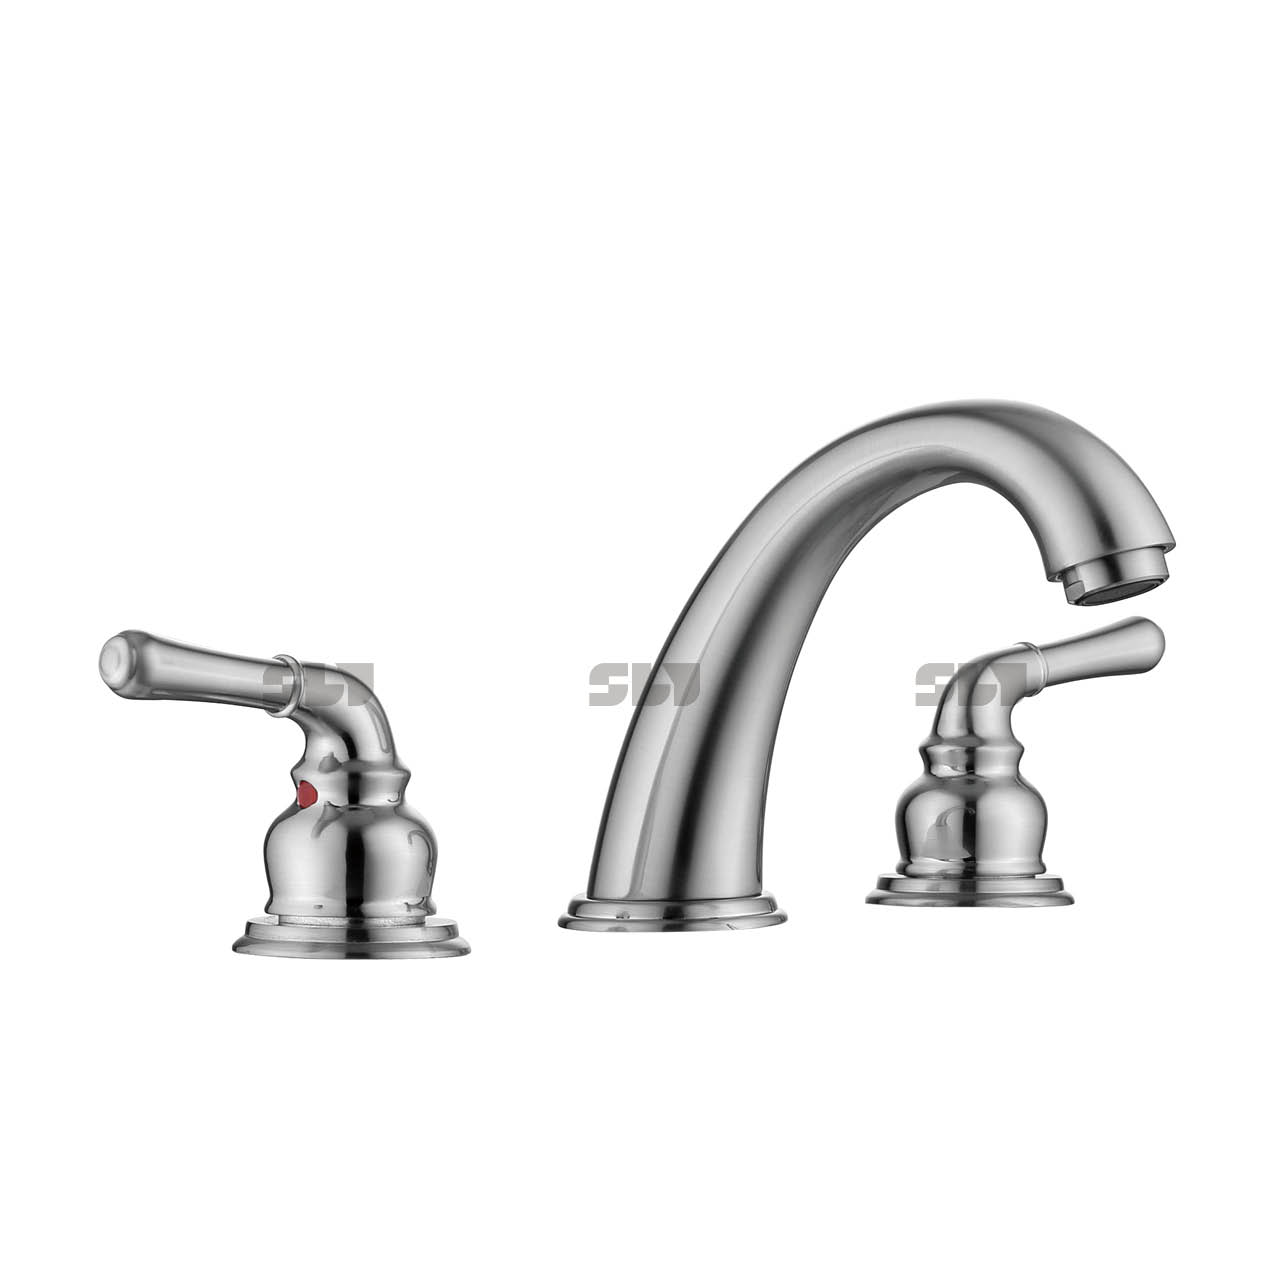 SLY Double Handle Hot And Cold Mix Faucet Bathroom Faucet